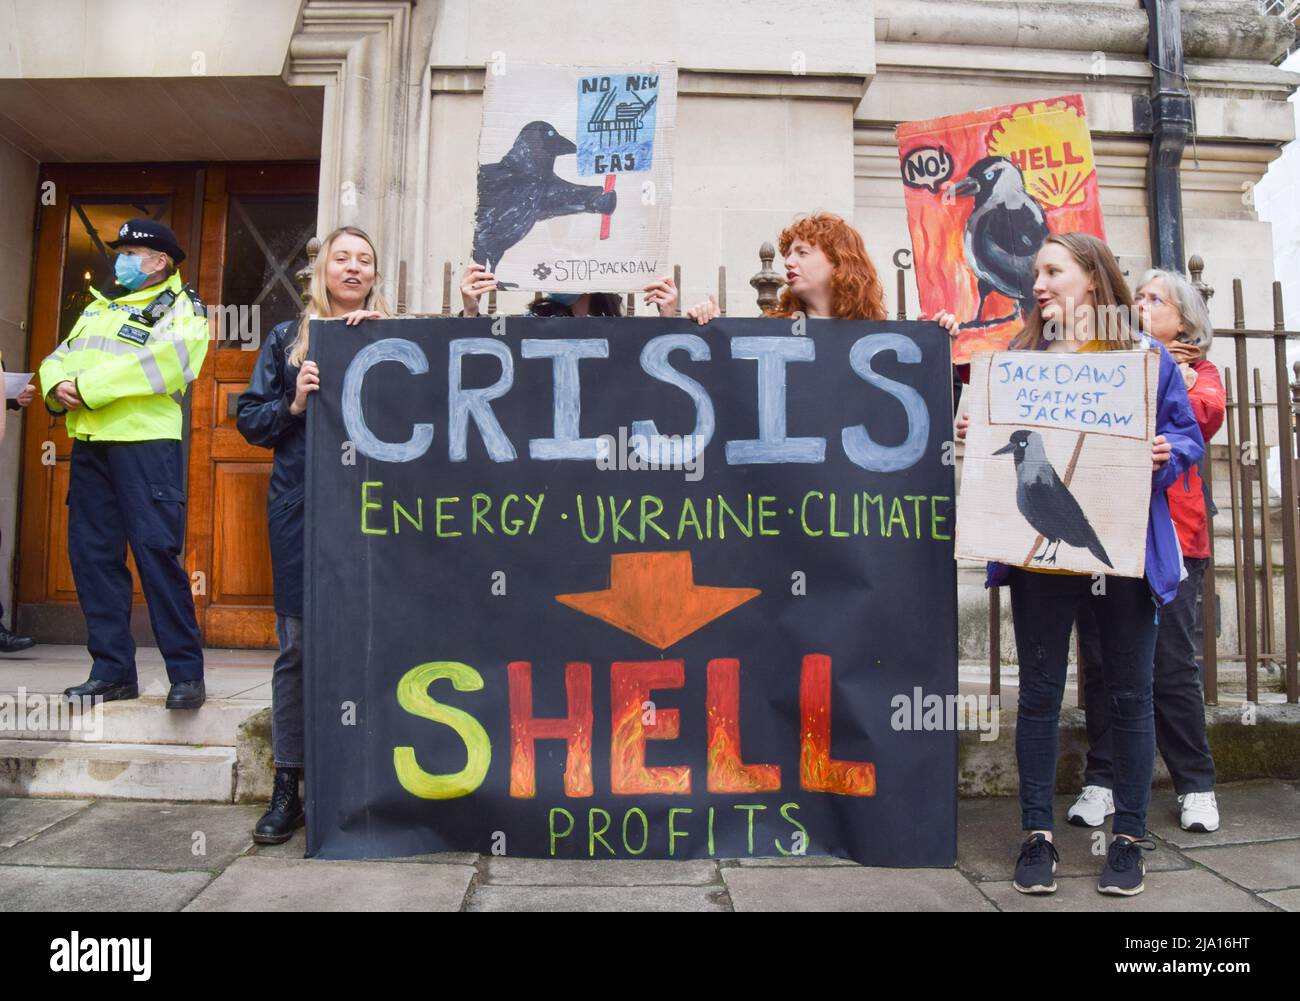 London, UK. 24th May 2022. Climate activists disrupted oil giant Shell's Annual General Meeting at Methodist Central Hall in Westminster. Protesters gathered outside while several dozean activists disrupted the meeting inside the venue. Stock Photo